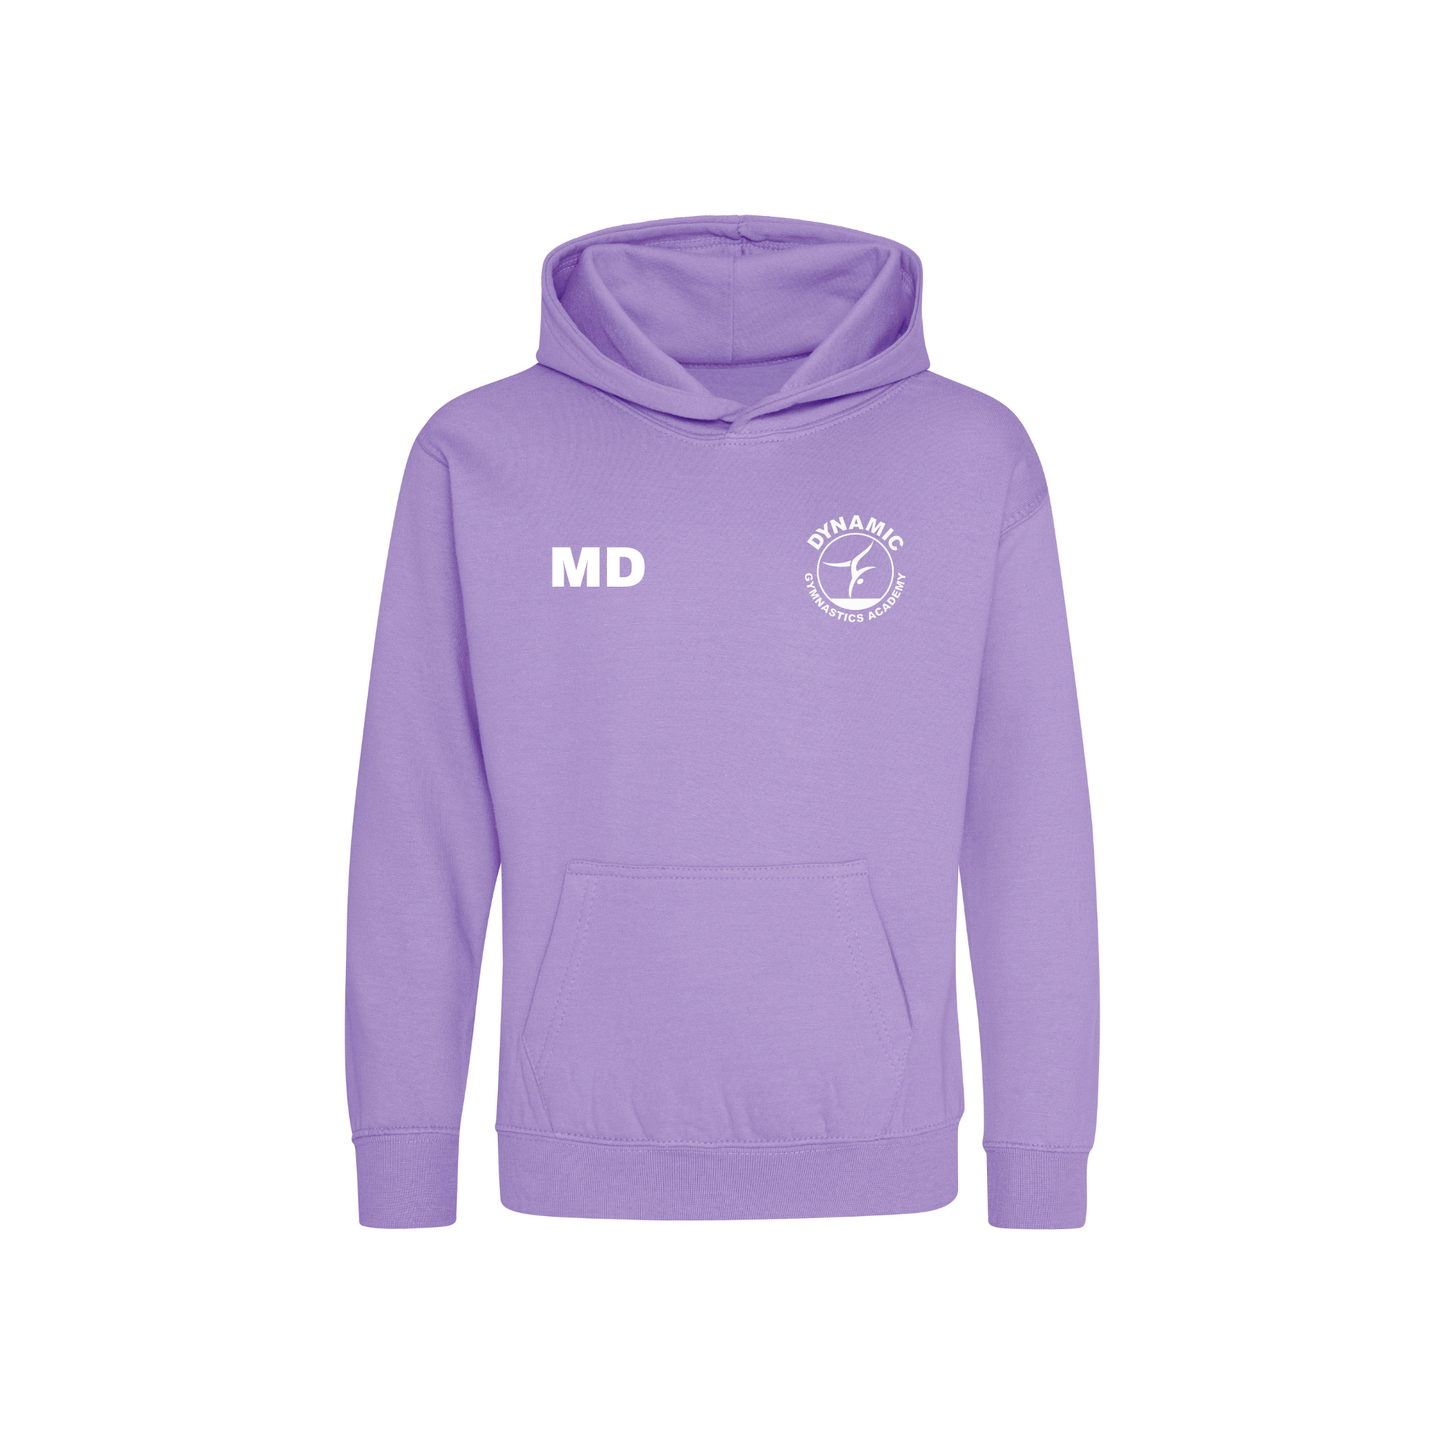 DGA - Digital Lavender Hoodie - Available from Age 3 to Adult XXL